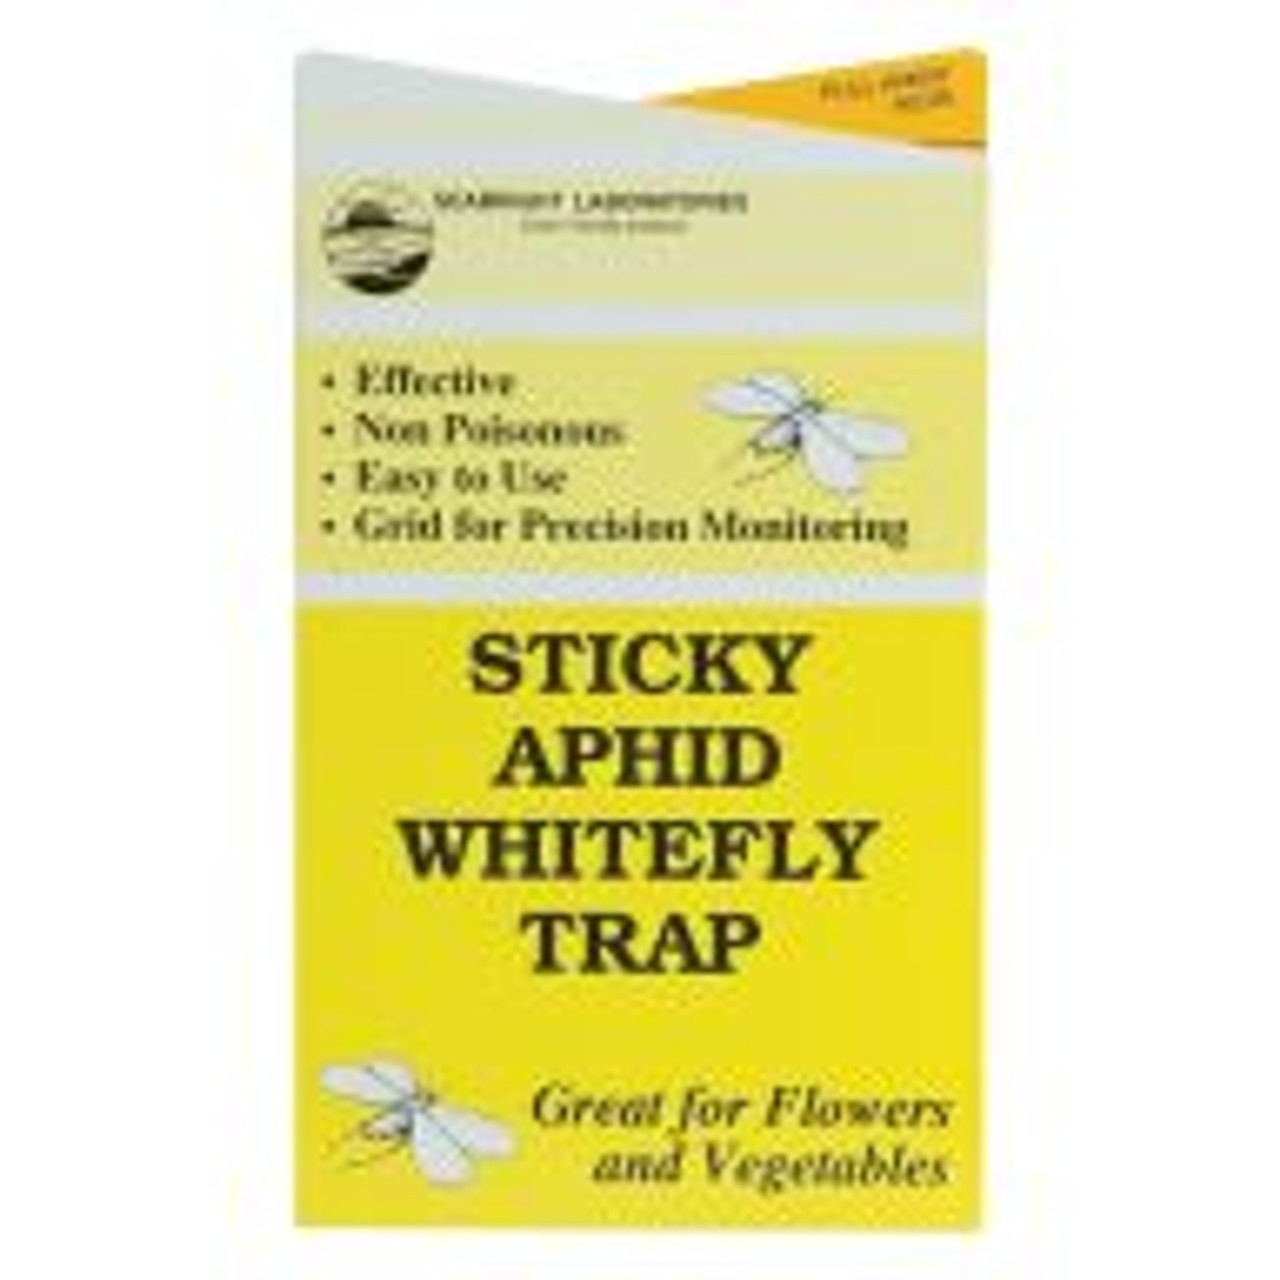 These 4 x 7 Sticky Aphid/Whitefly Traps unfold to expose adhesive on both sides to cover approximately 30 square inches per trap. Yellow coloration of weatherproof cards attracts aphids, whiteflies, leafhoppers, froghoppers, moths, and more. Pack of 30 traps.